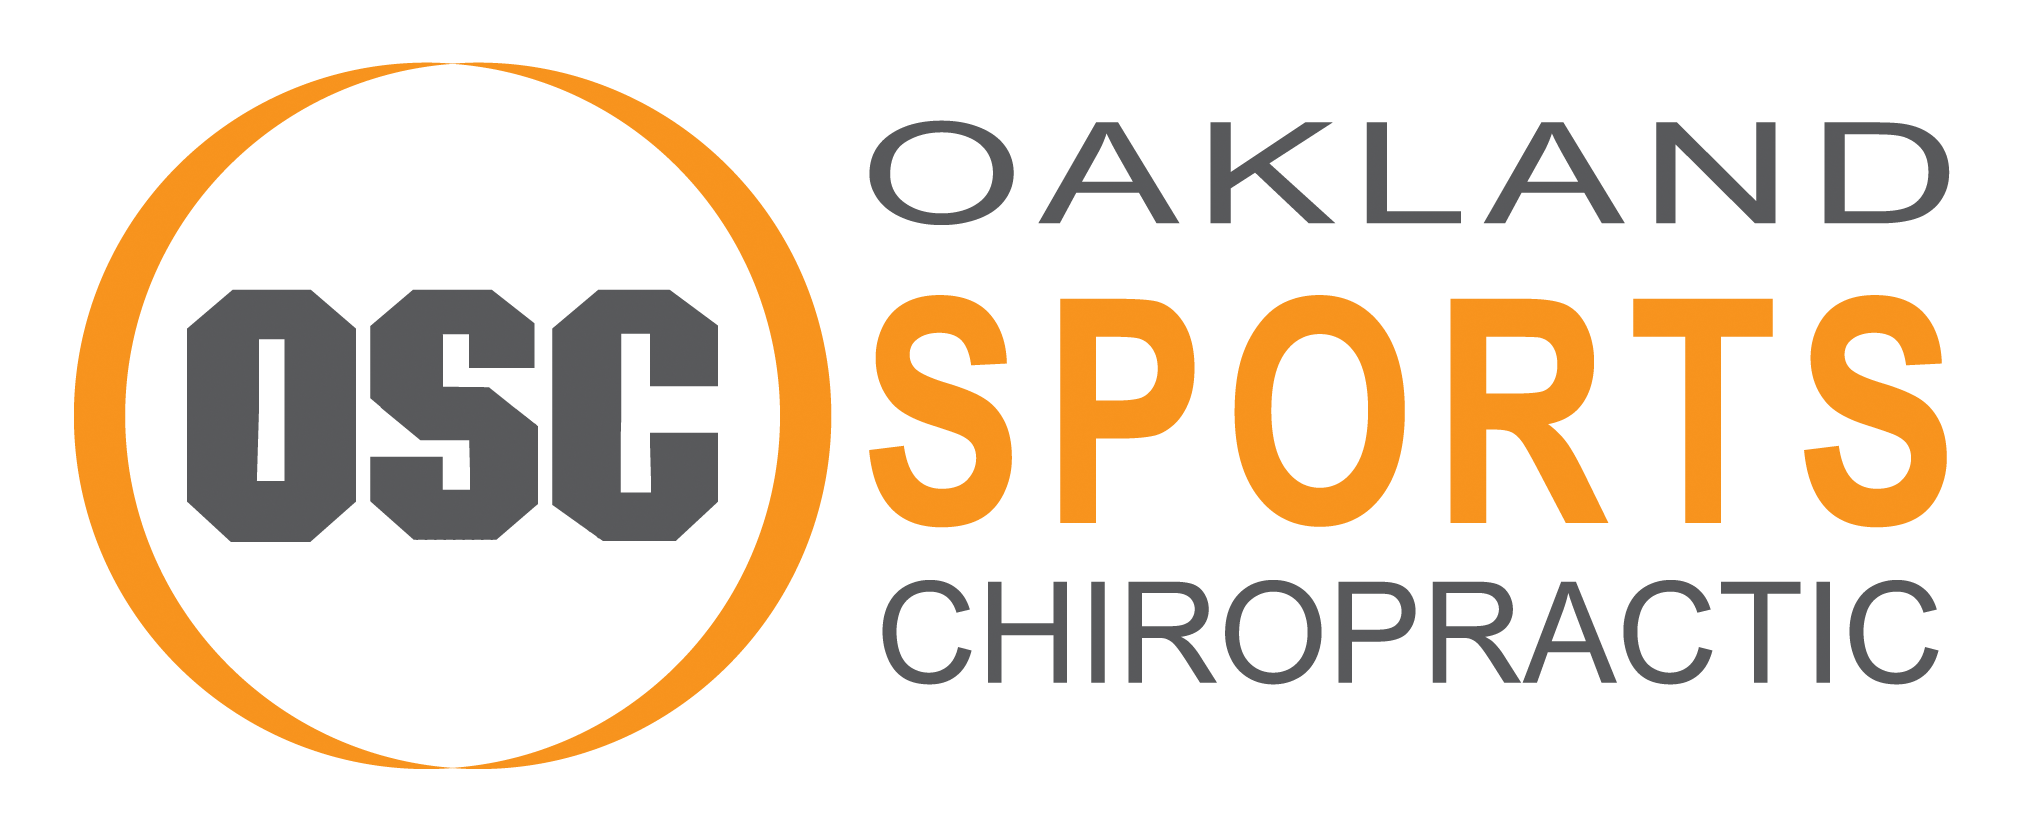 Oakland Sports Chiropractic